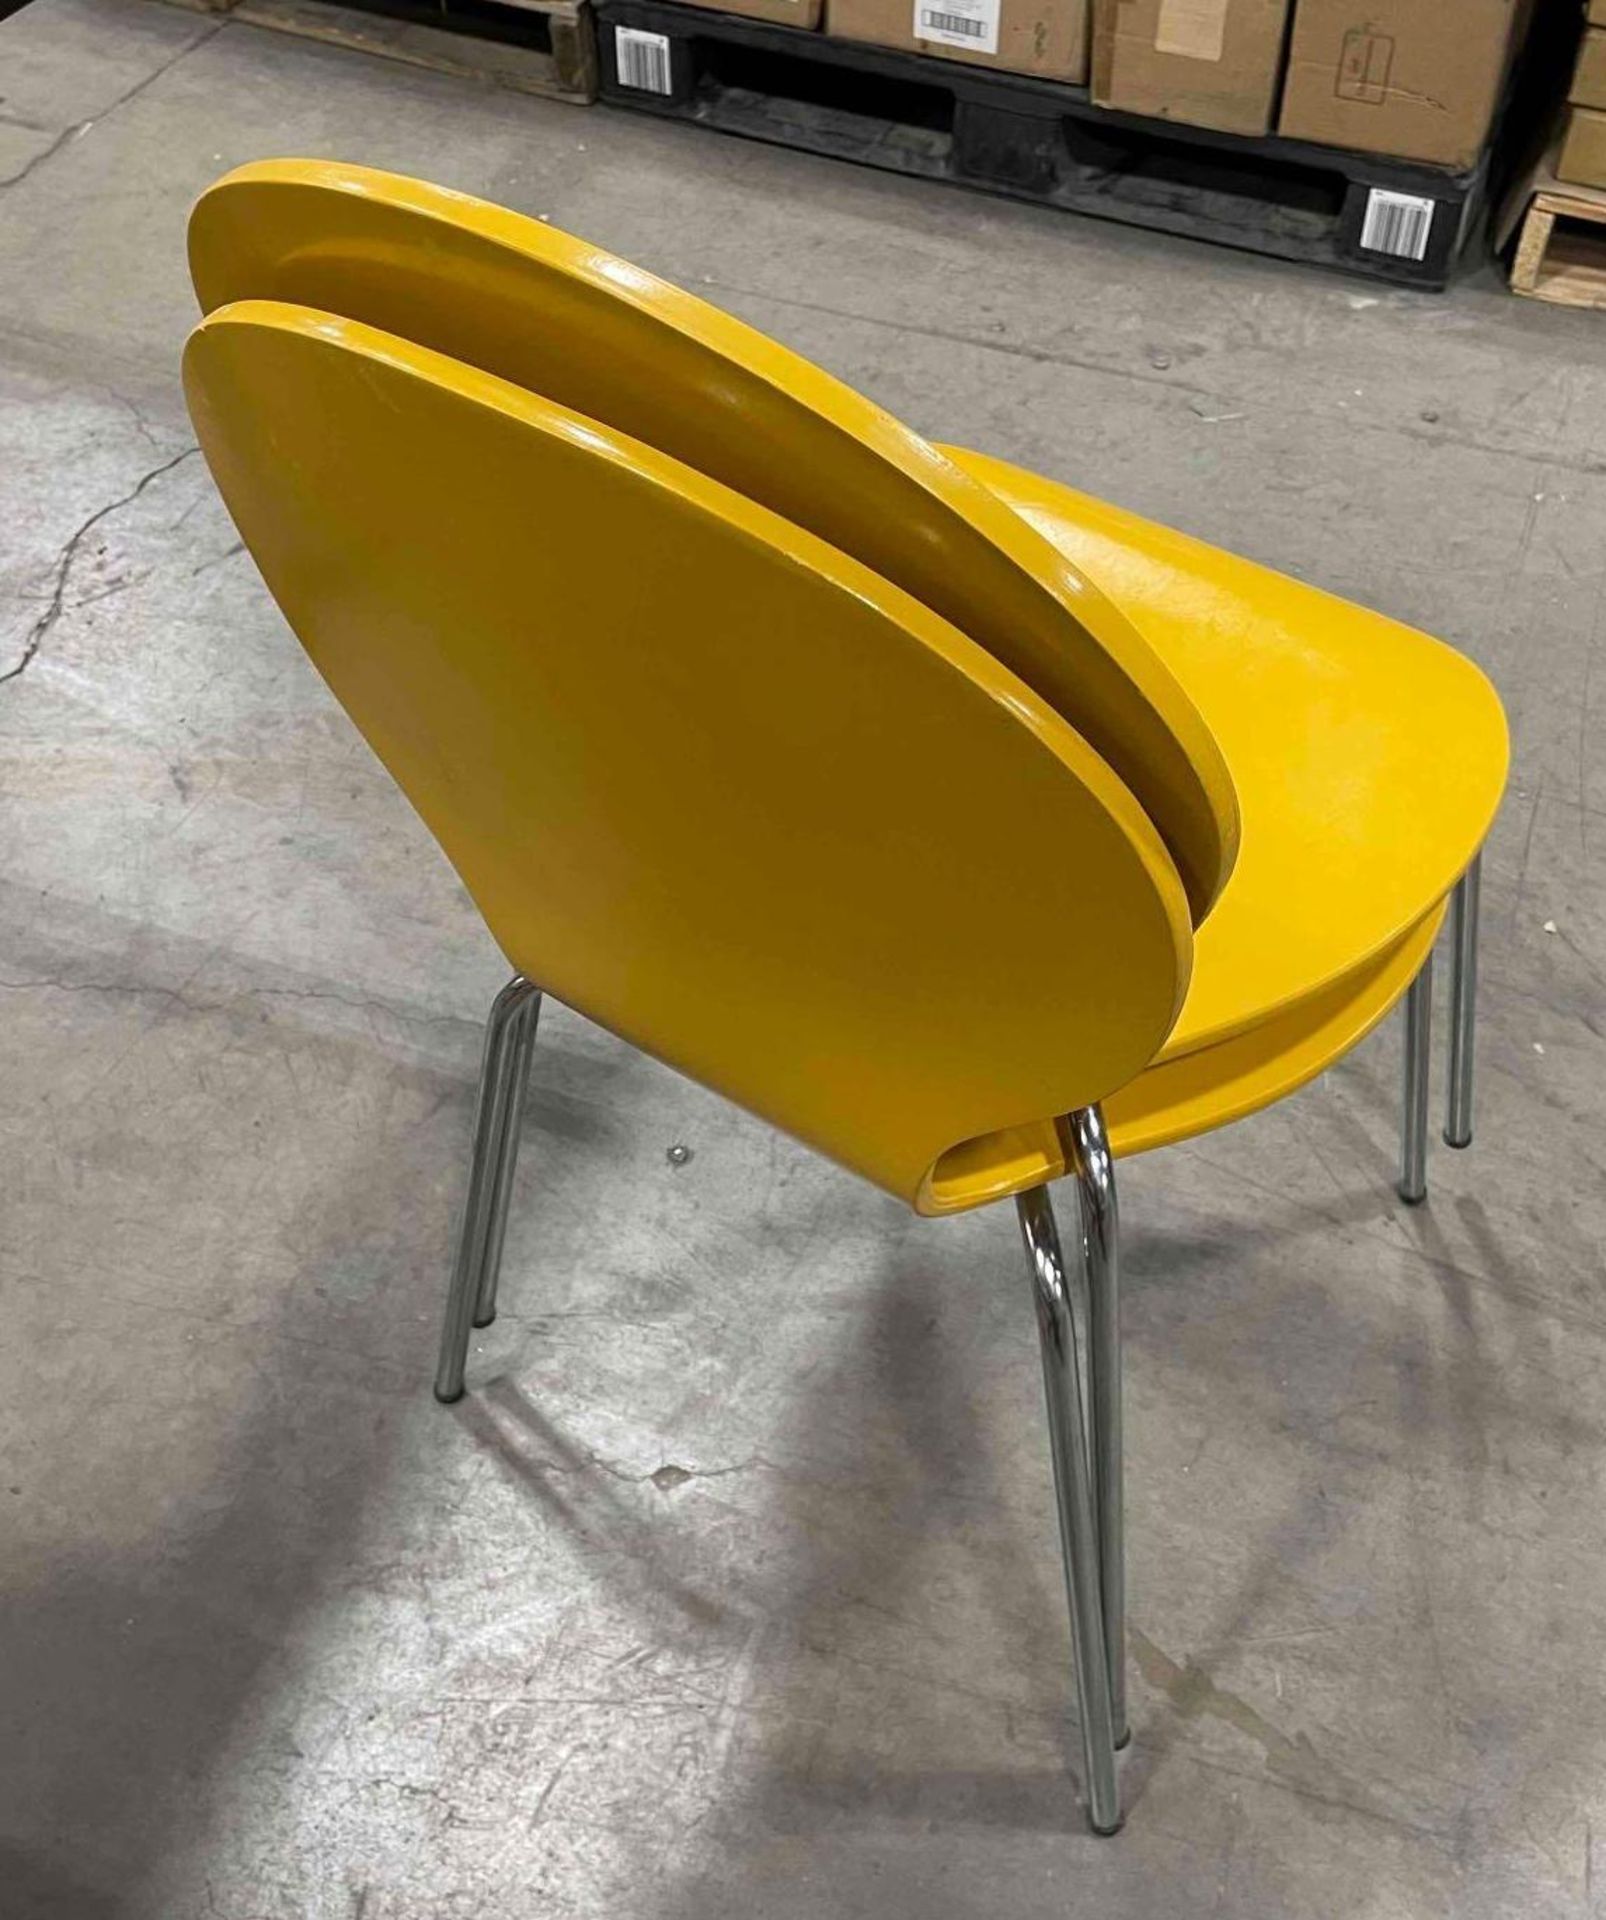 (2) STRUCTUBE YELLOW BENTWOOD CHAIR - Image 3 of 3